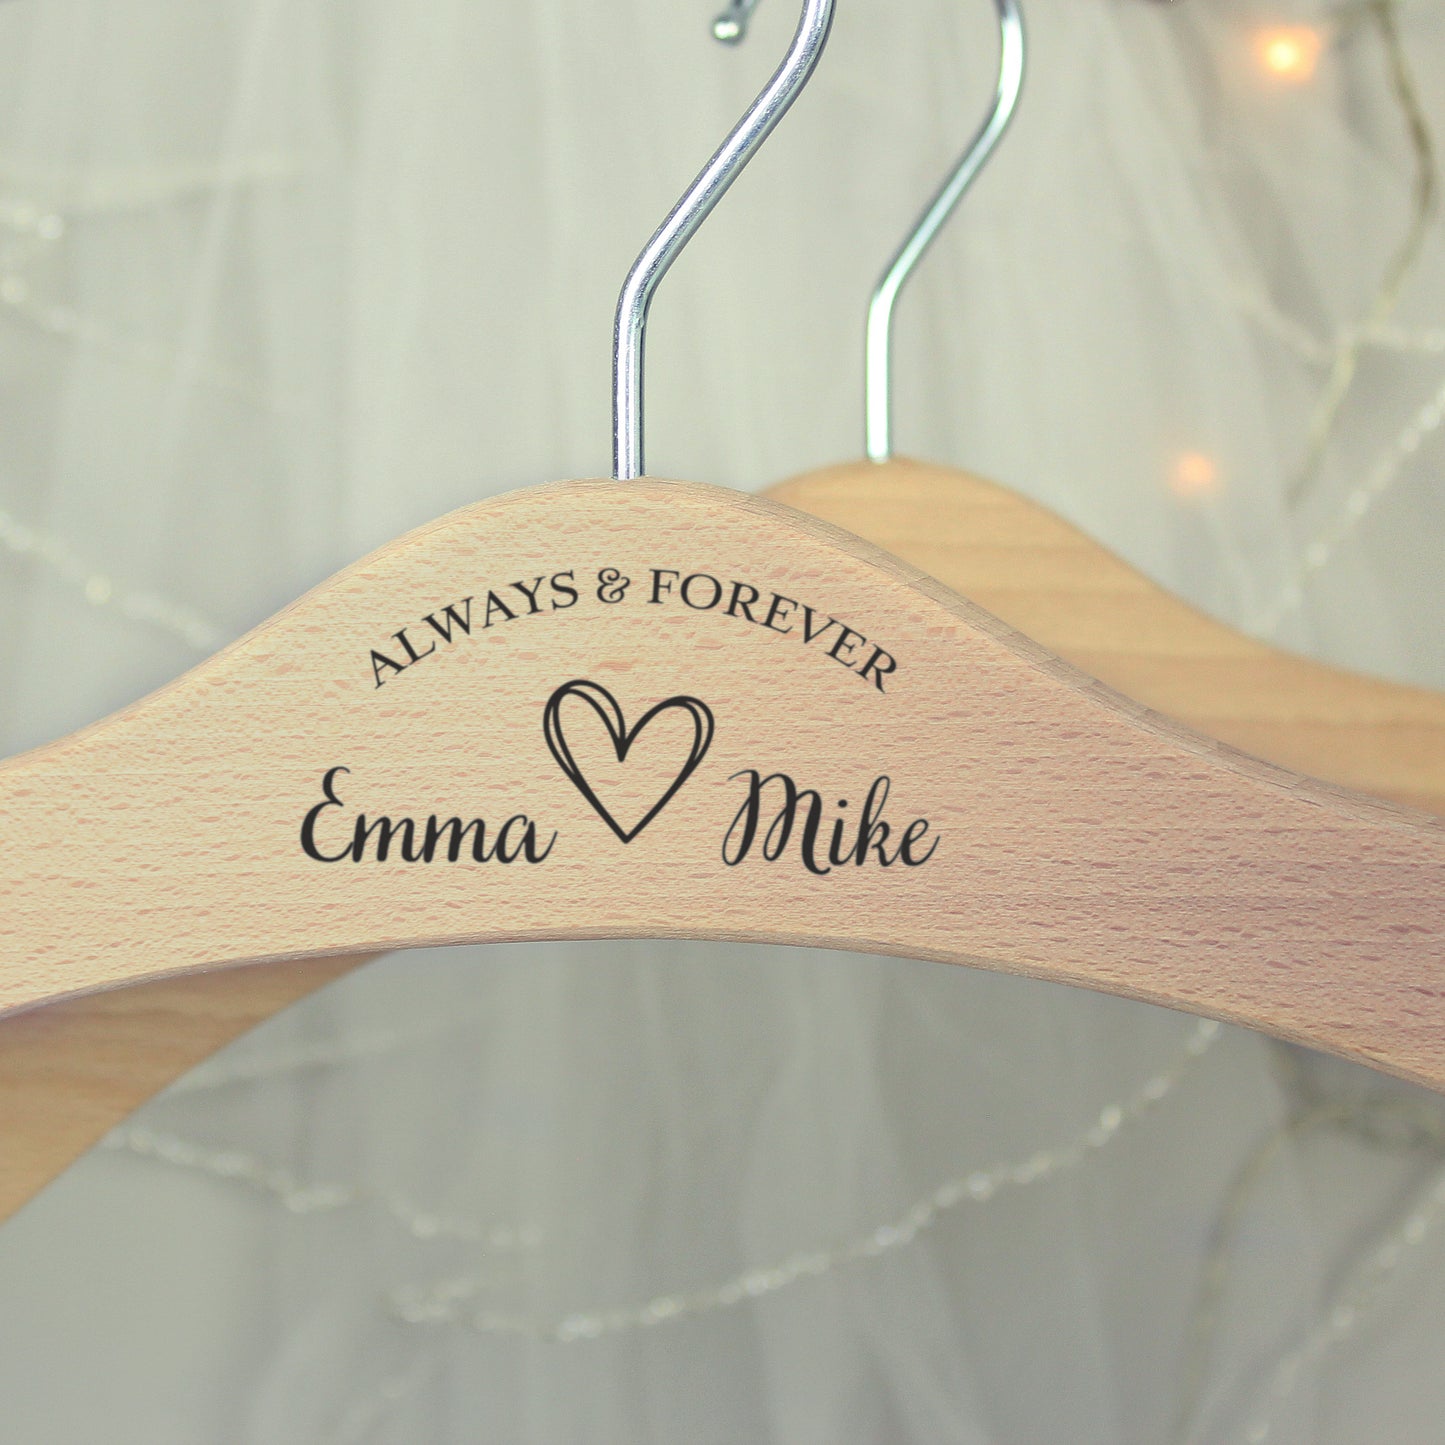 centre of personalised wooden wedding hanger with Bride & Groom's names under the words "Always and Forever" and with a pretty sketched heart between the names. Room for further personalisation on each arm of the hanger.